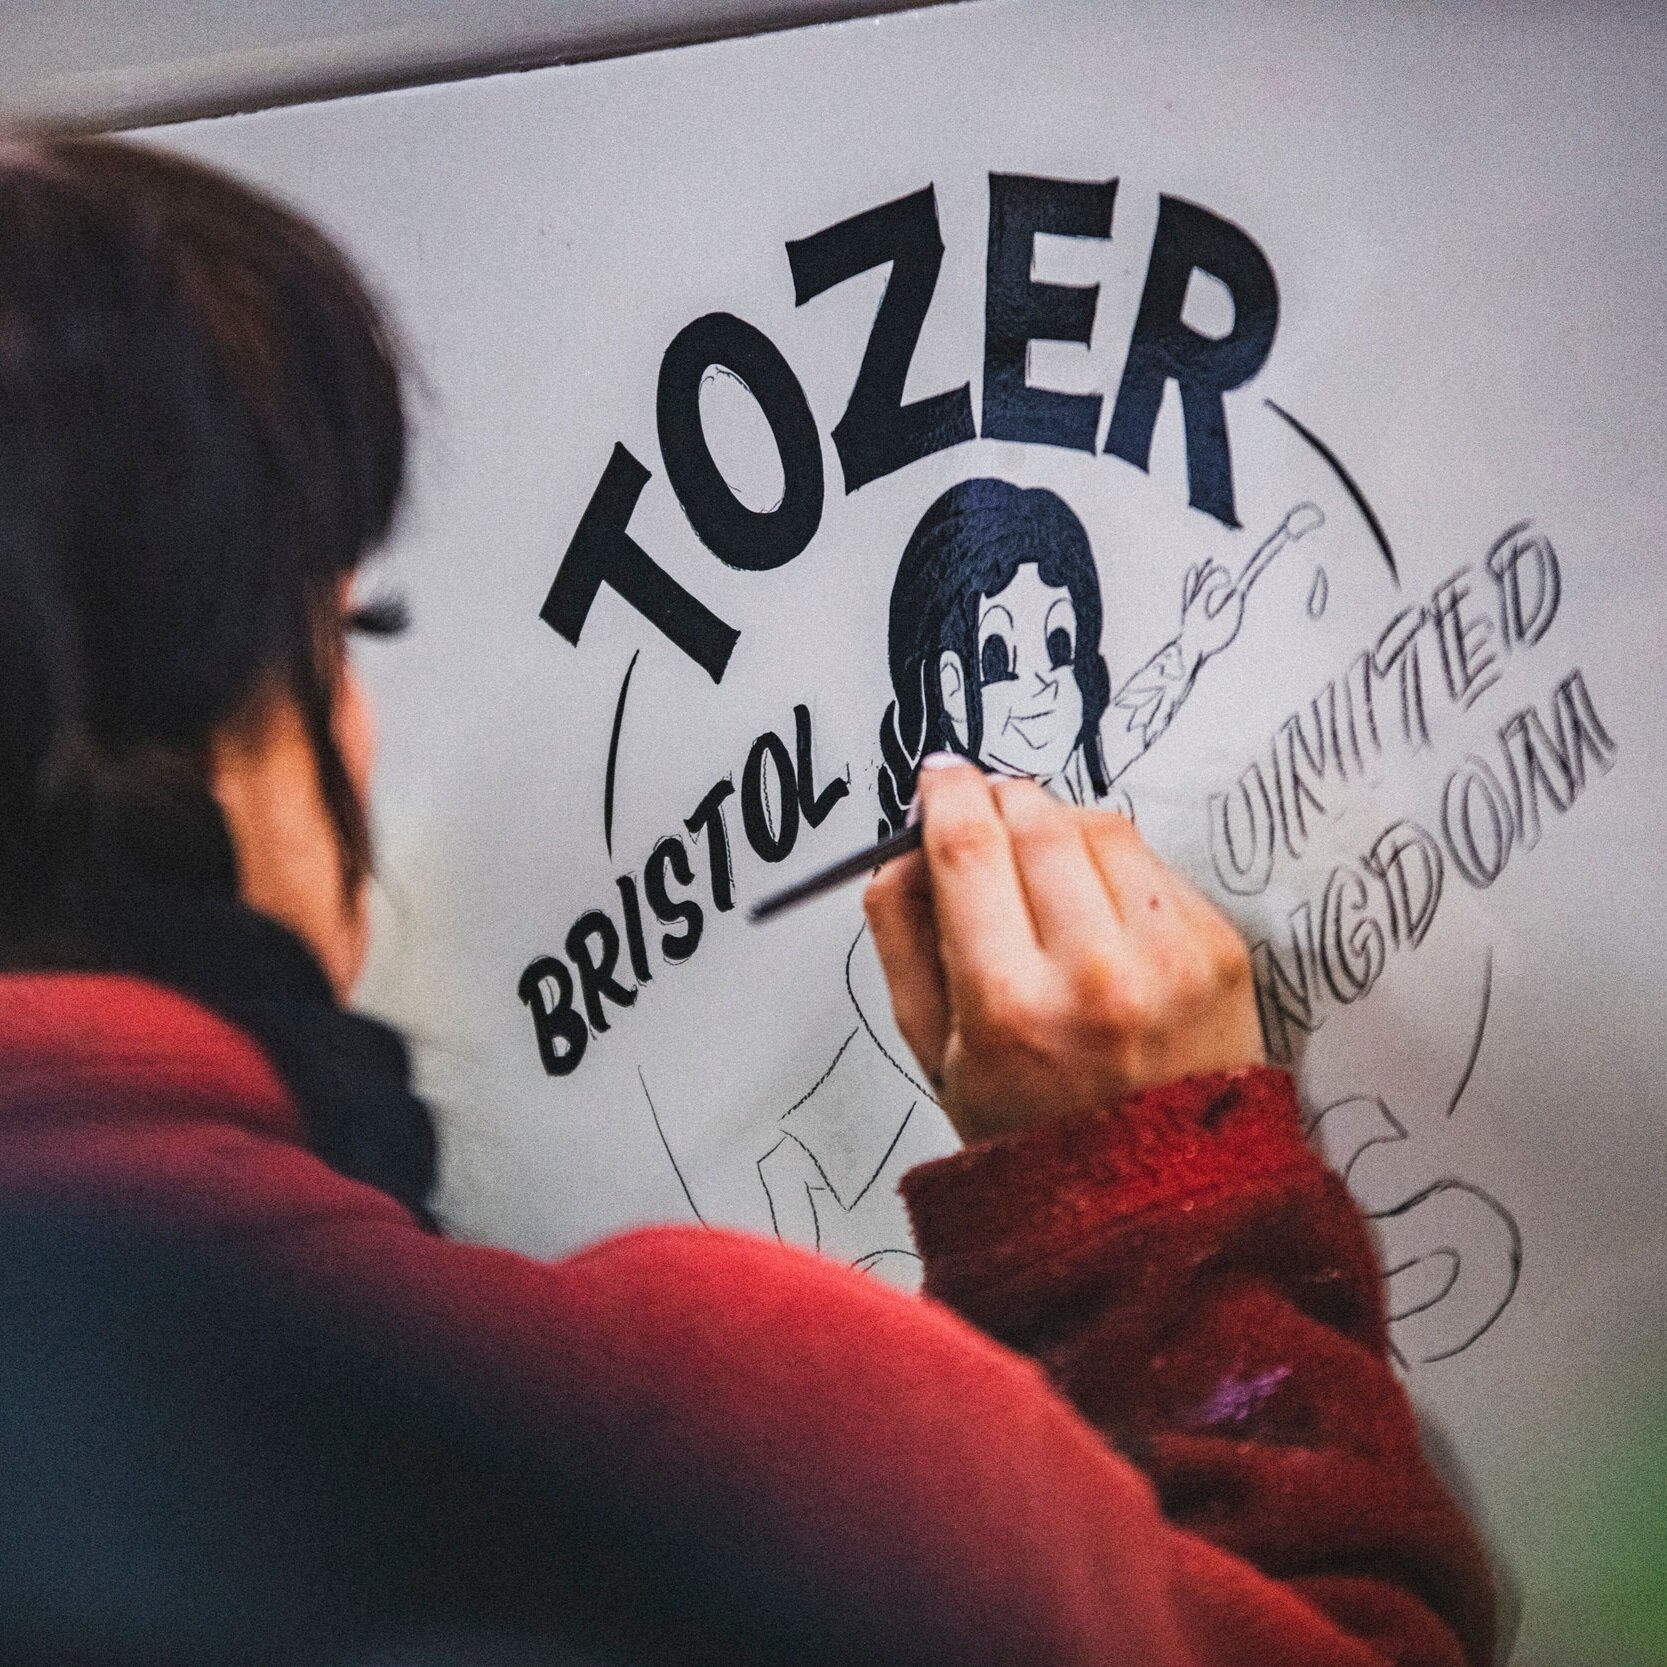 Tozer Signs painting her own logo on a vintage car.